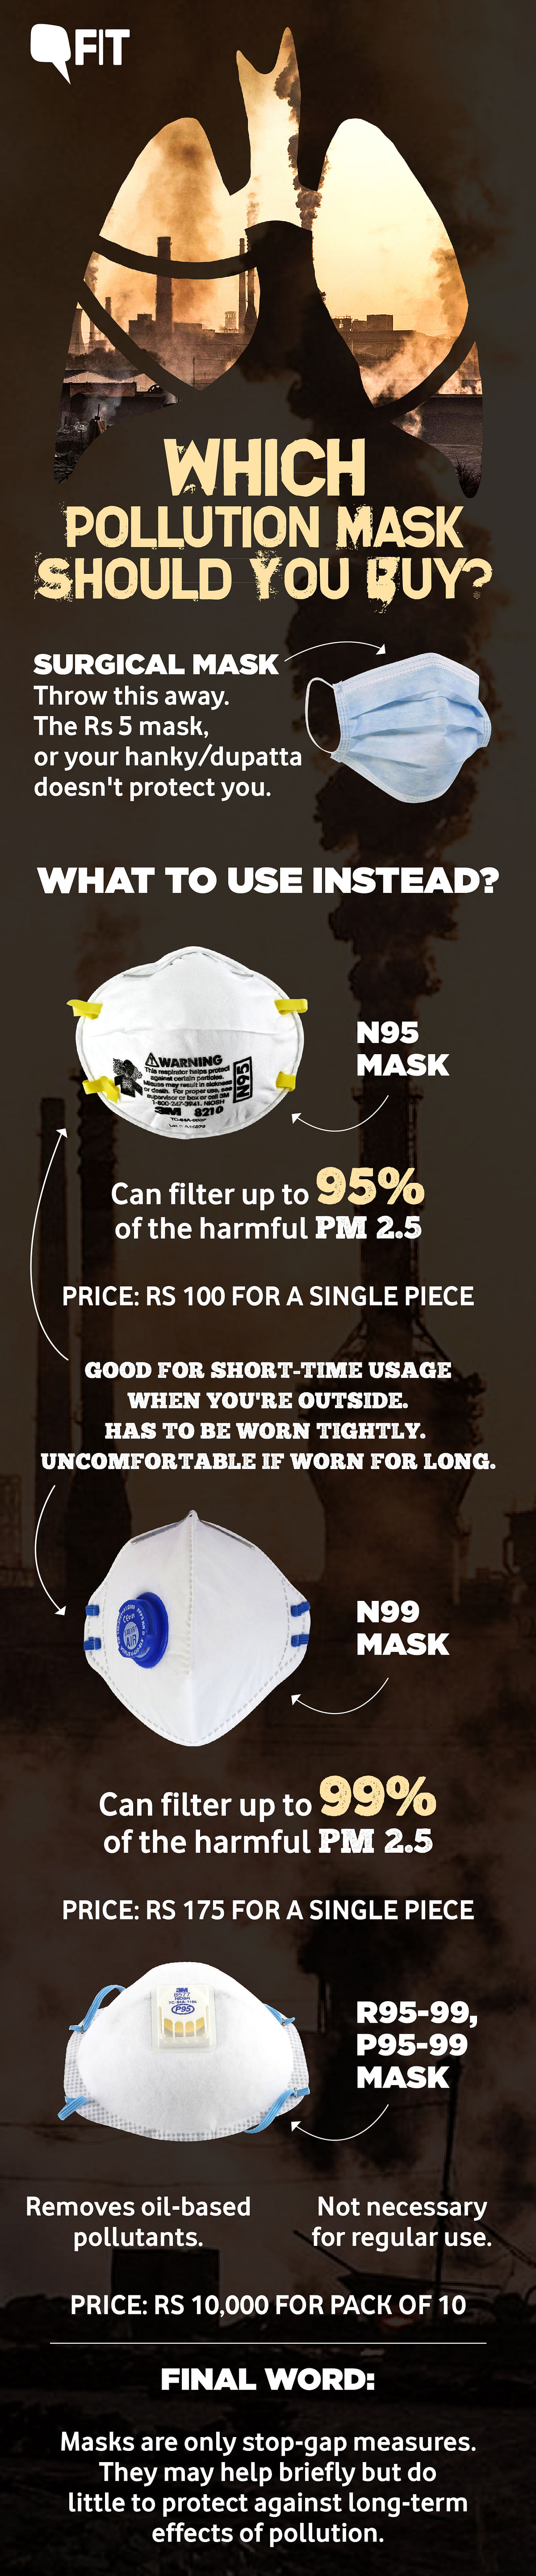 Fighting Air Pollution: What Mask Should You Be Buying?